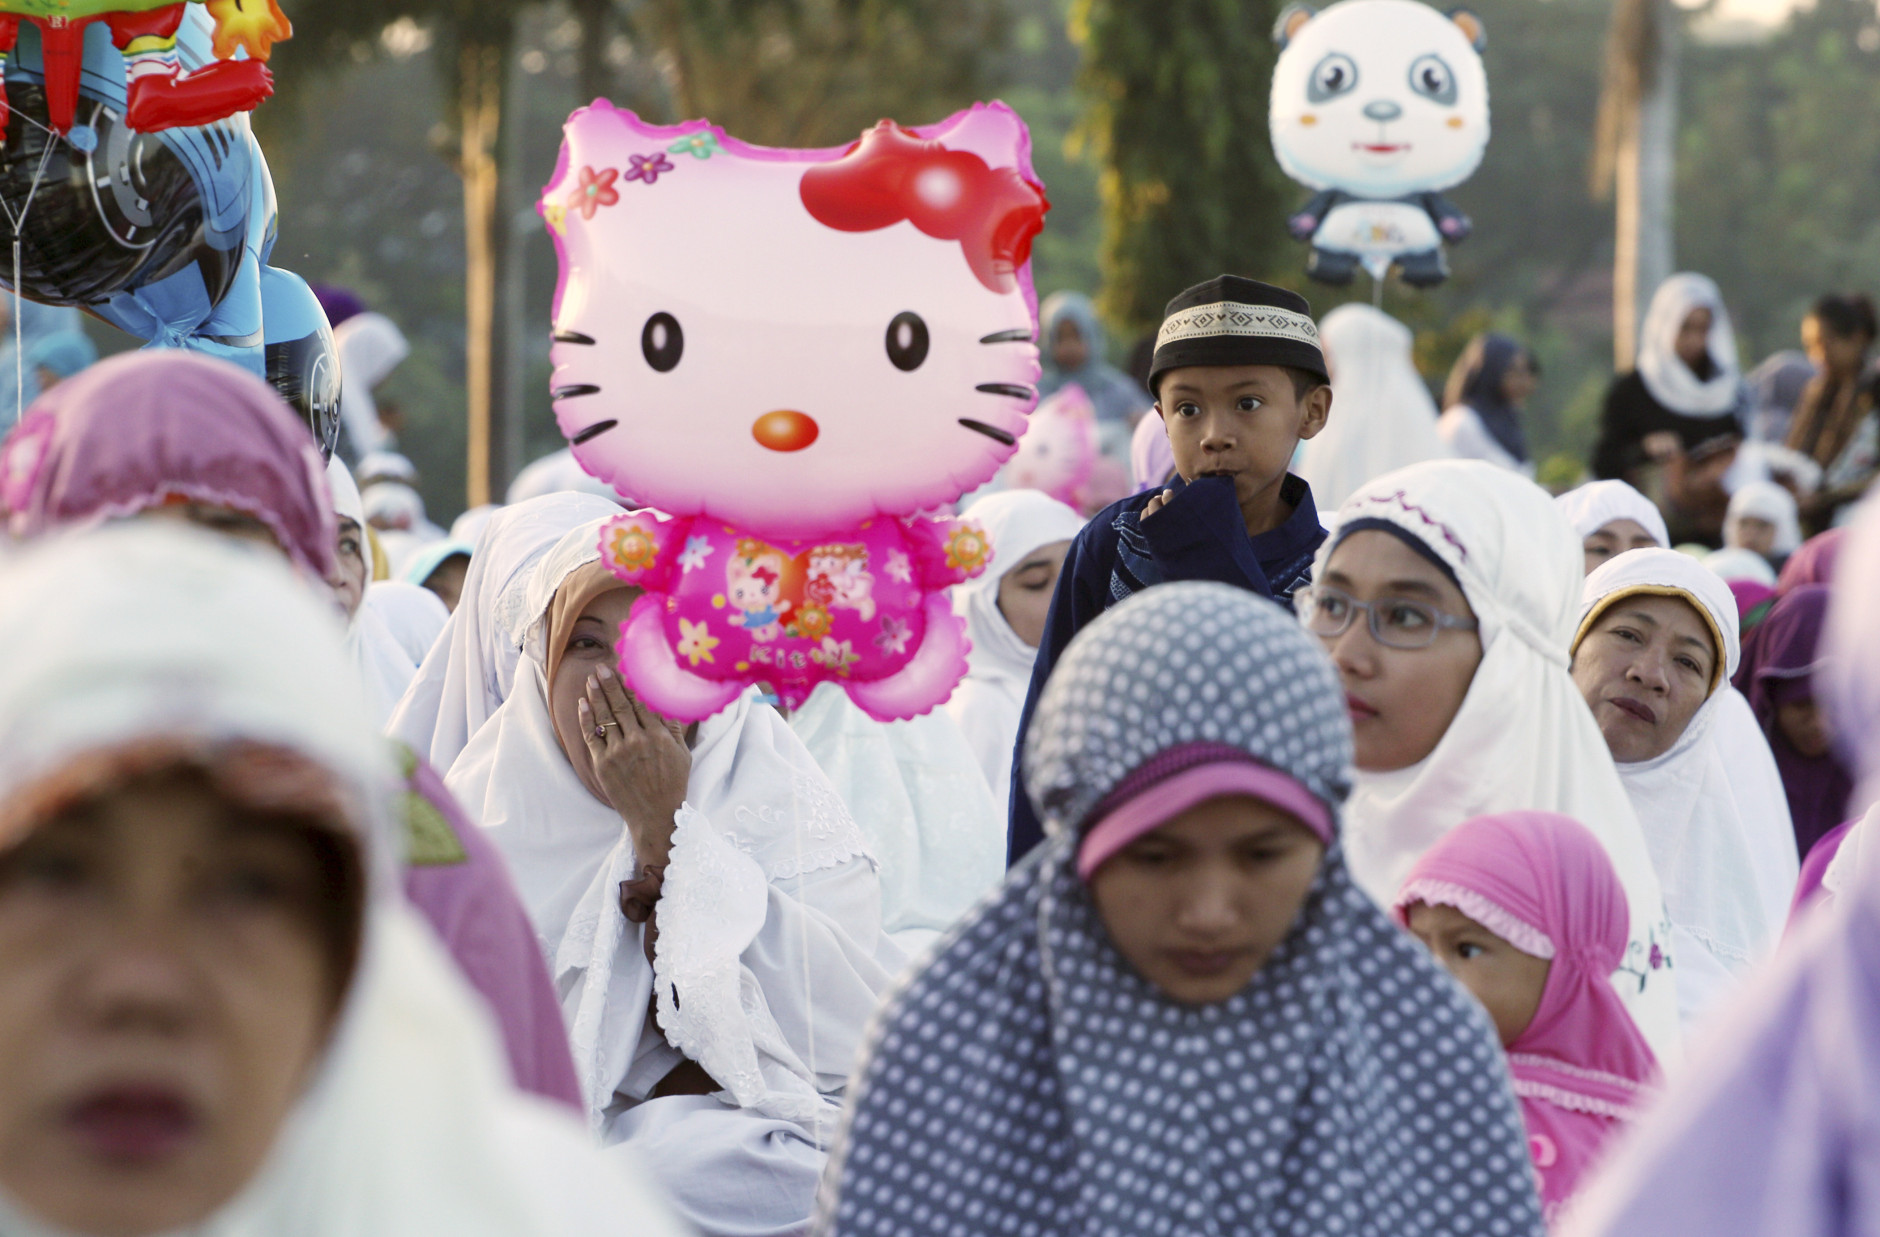 Muslim women attend an Eid al-Fitr prayer, with a  balloon of cartoon character "Hello Kitty" floating, to mark the end of the holy fasting month of Ramadan in Bali, Indonesia, Wednesday, July 6, 2016.(AP Photo/Firdia Lisnawati)